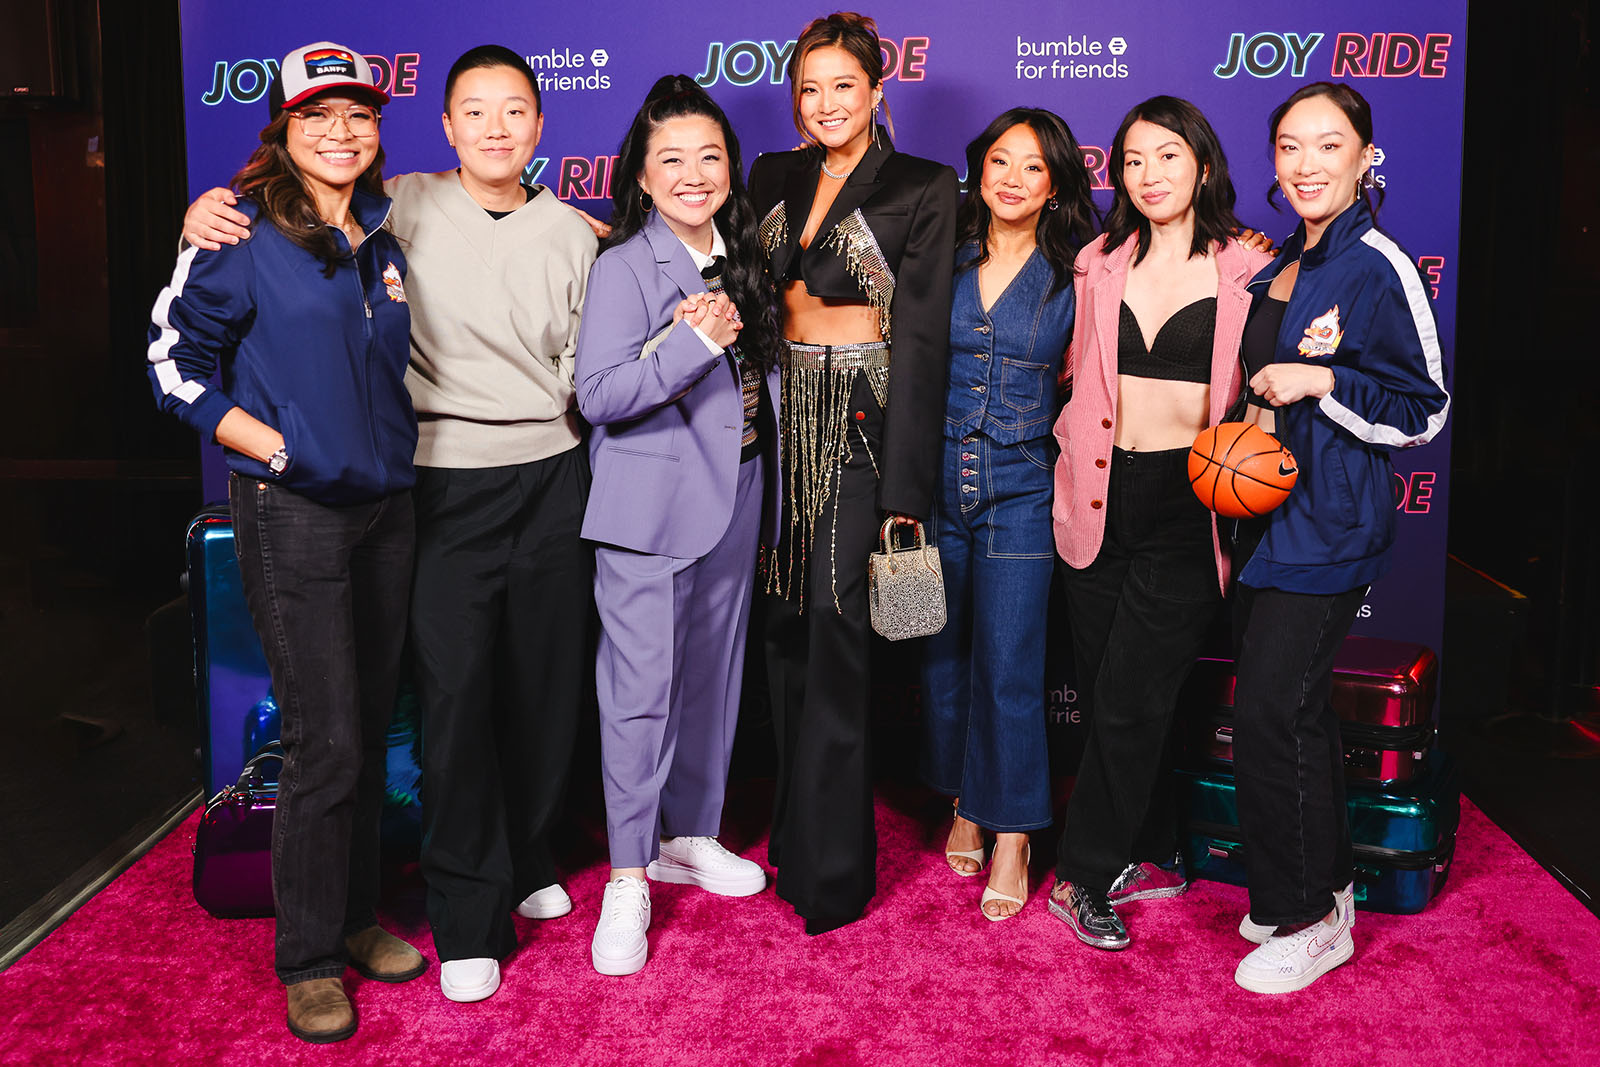 Director Adele Lim and the cast of Joy Ride at the premiere